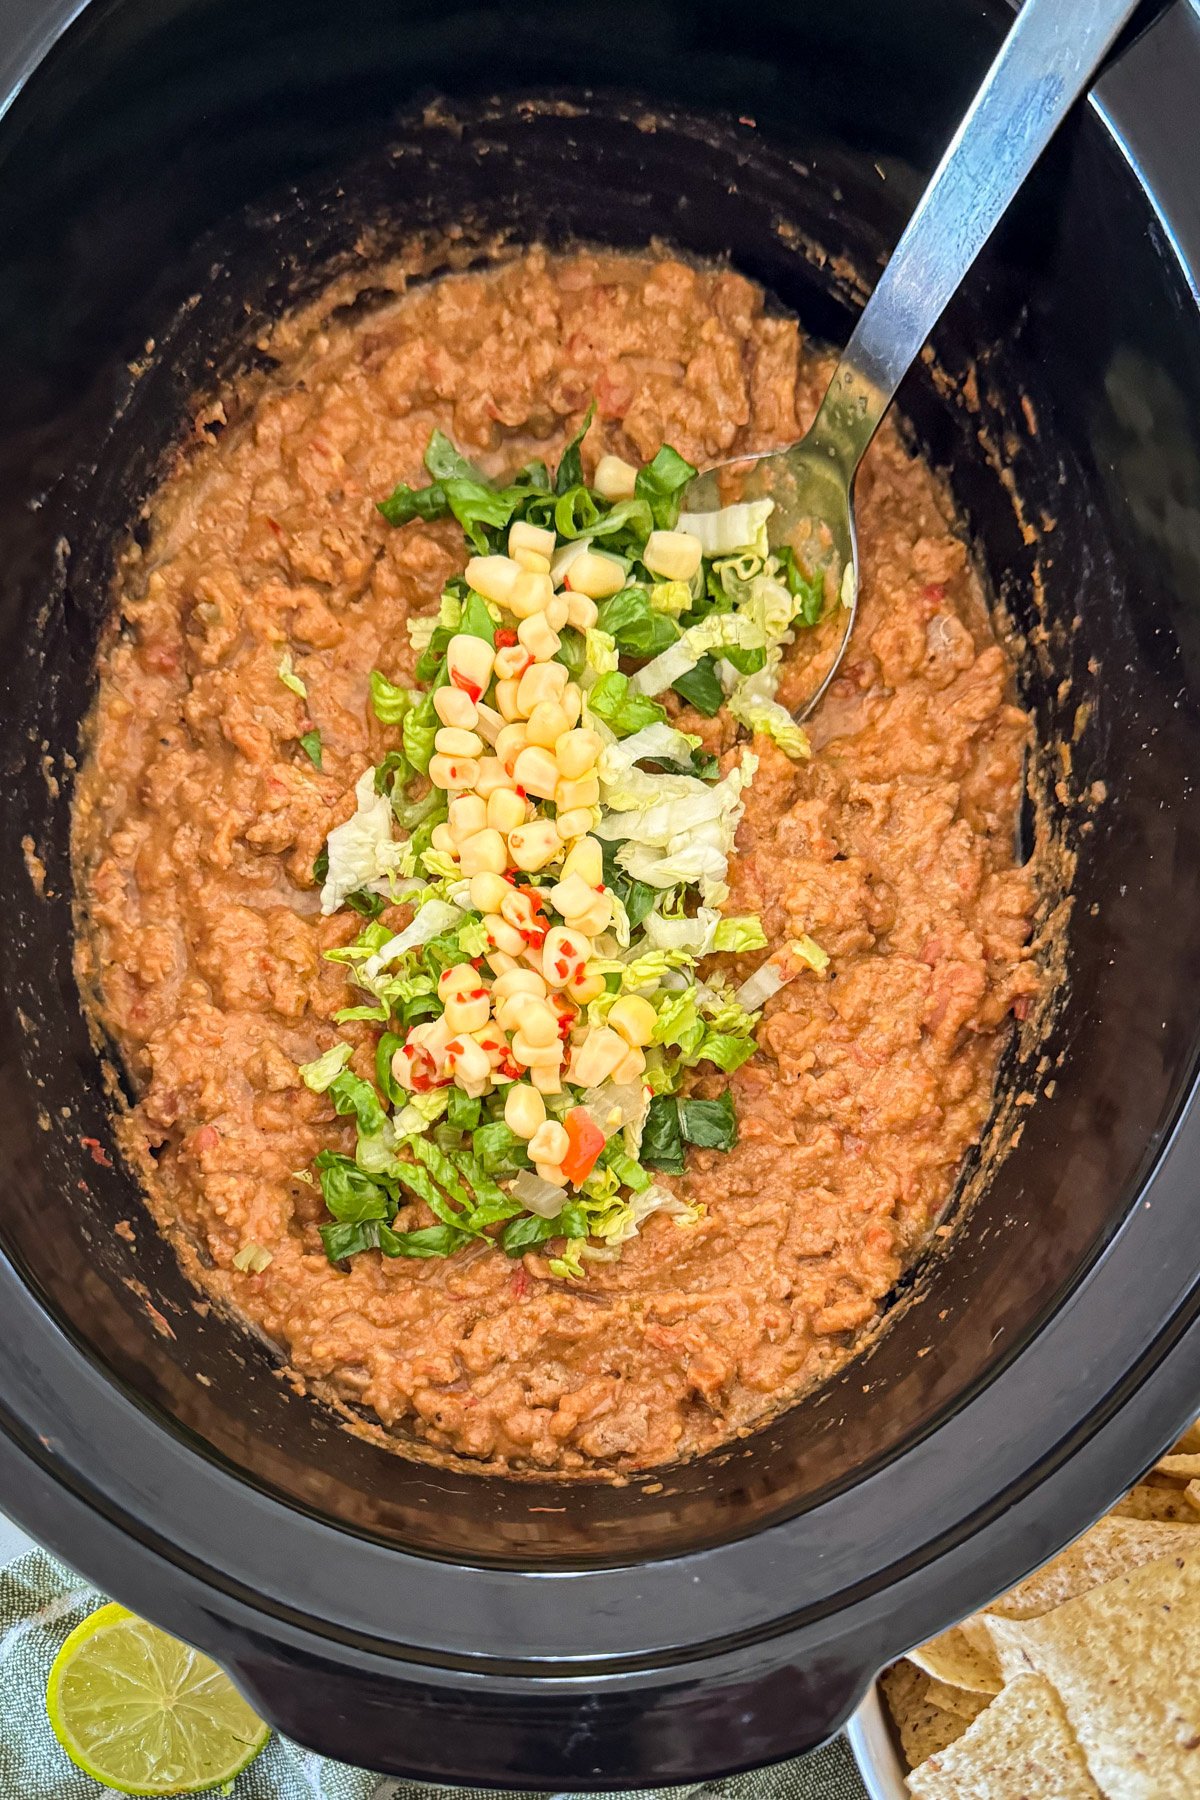 taco dip with toppings in black bowl of a slow cooker from above